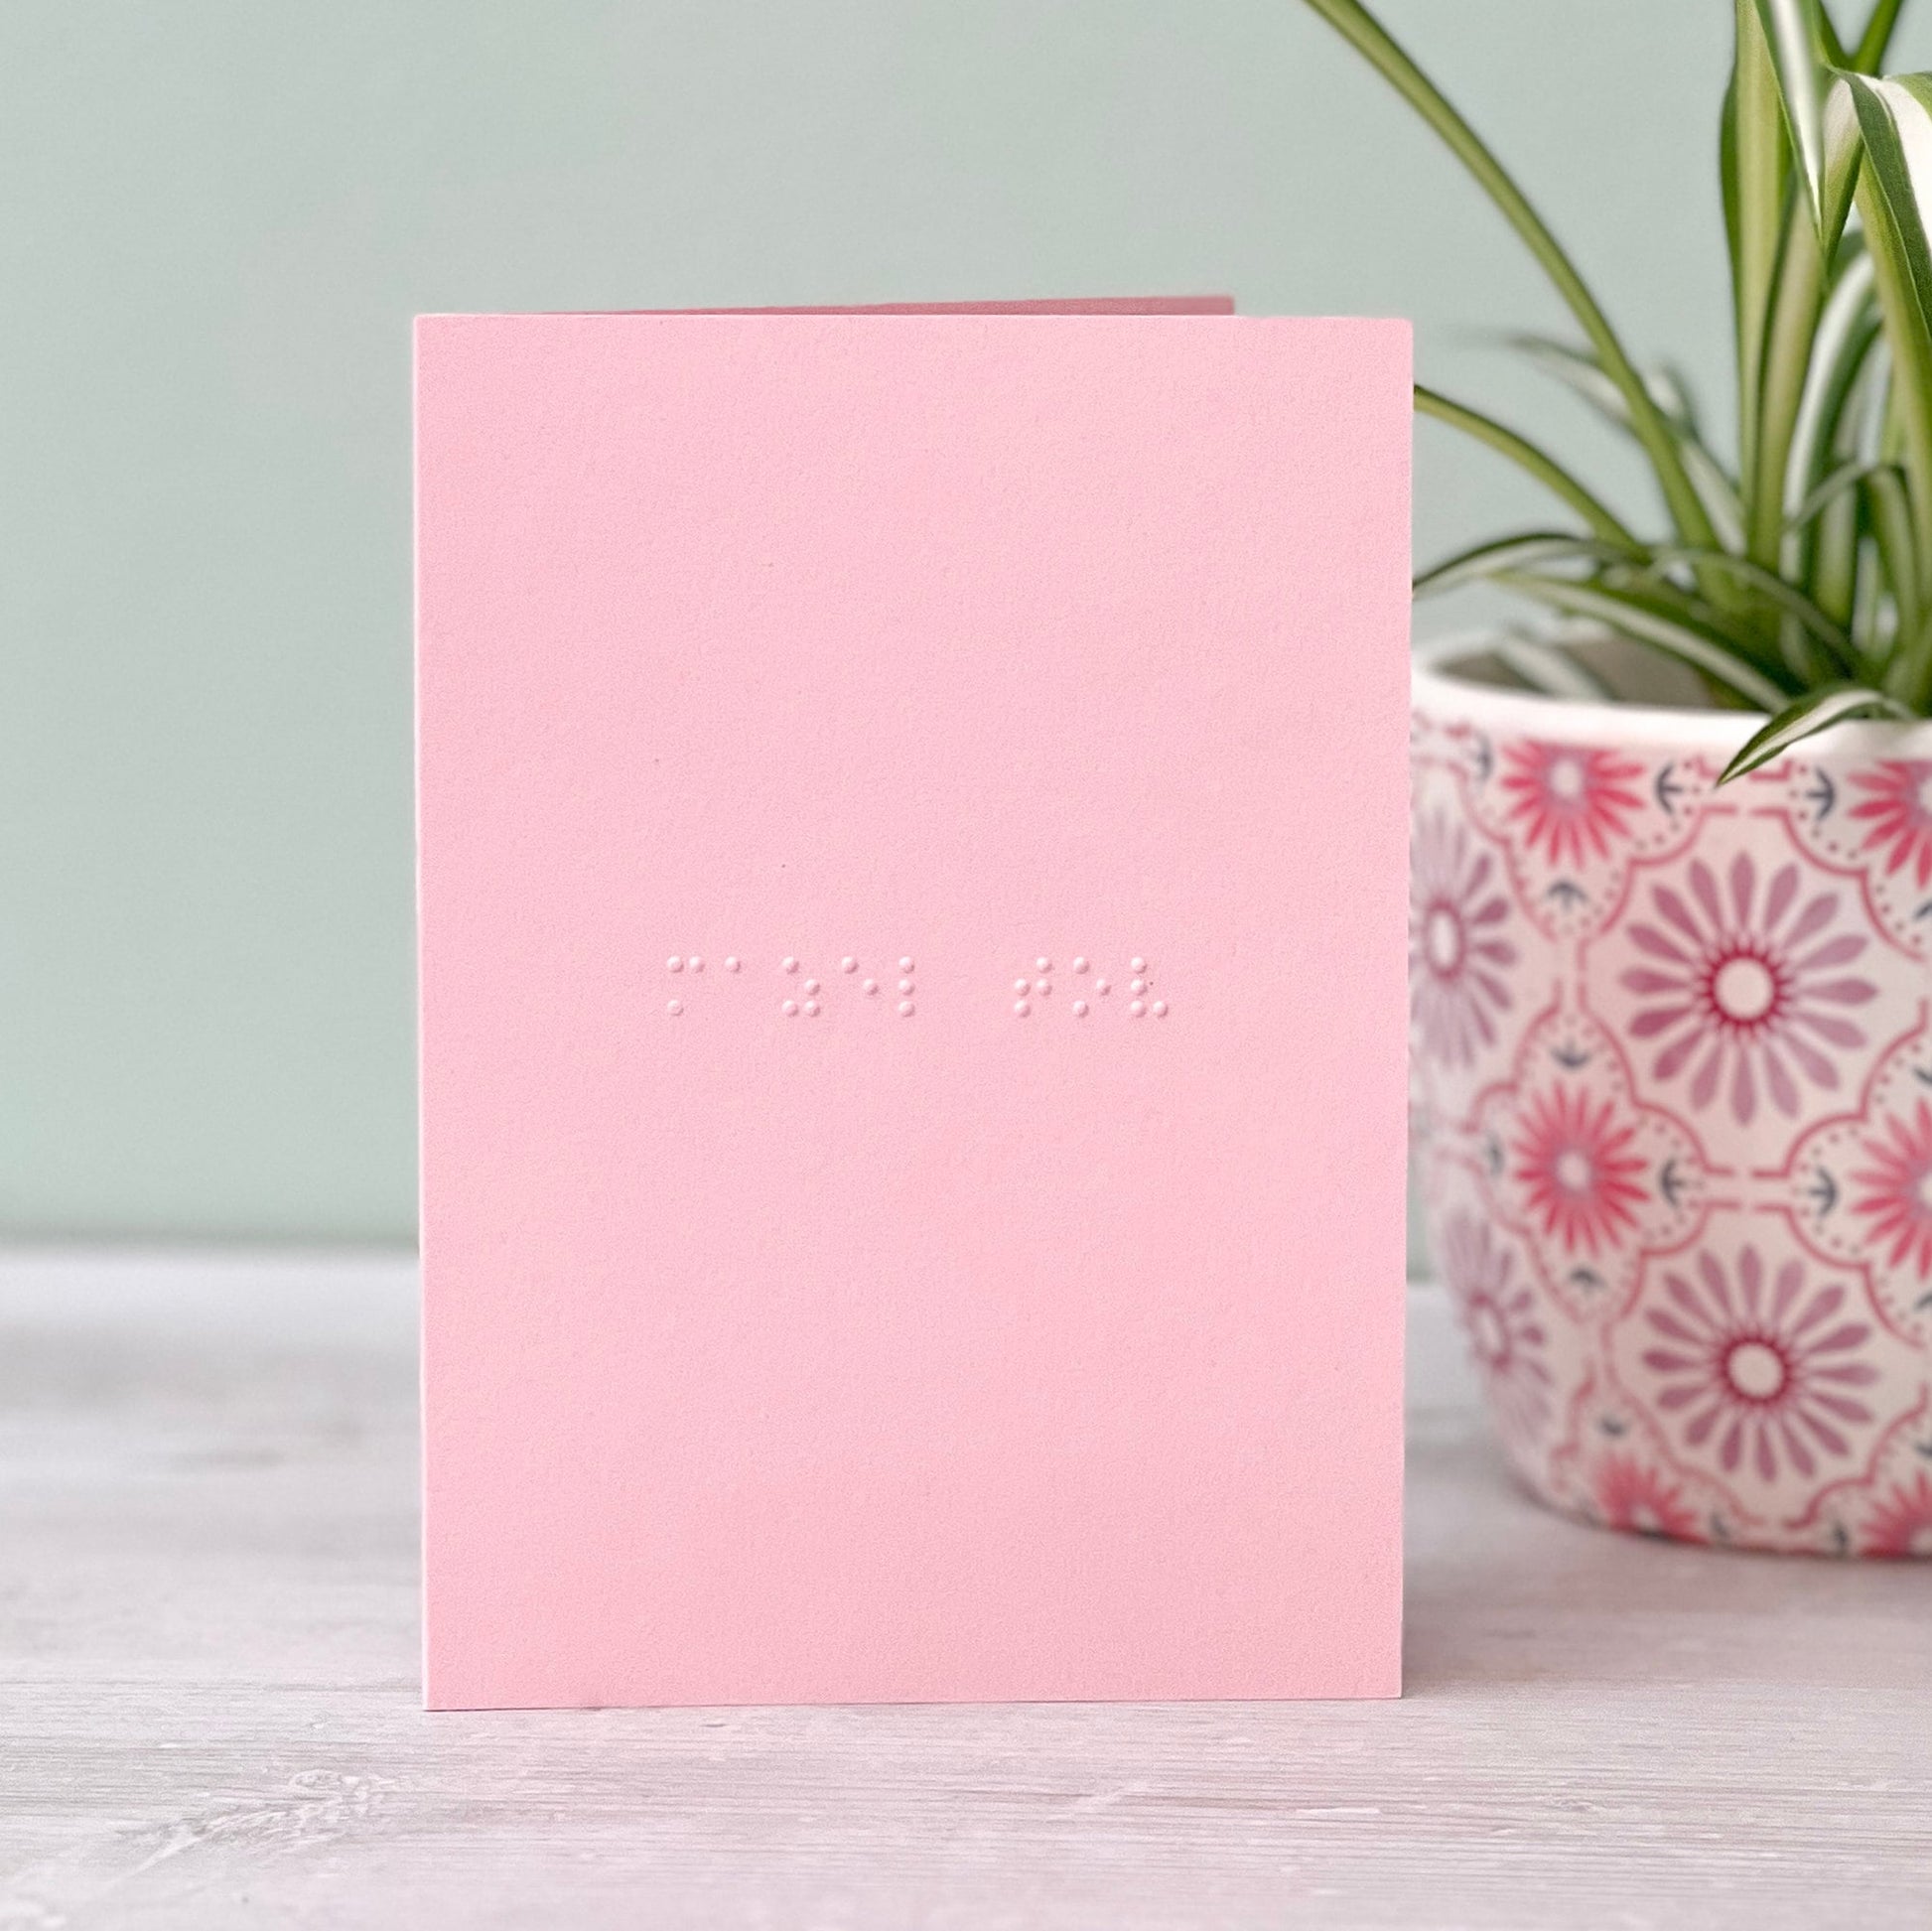 A pastel pink greetings card with mazel tov written in grade 1 braille. There is a plant to the right of the photo.